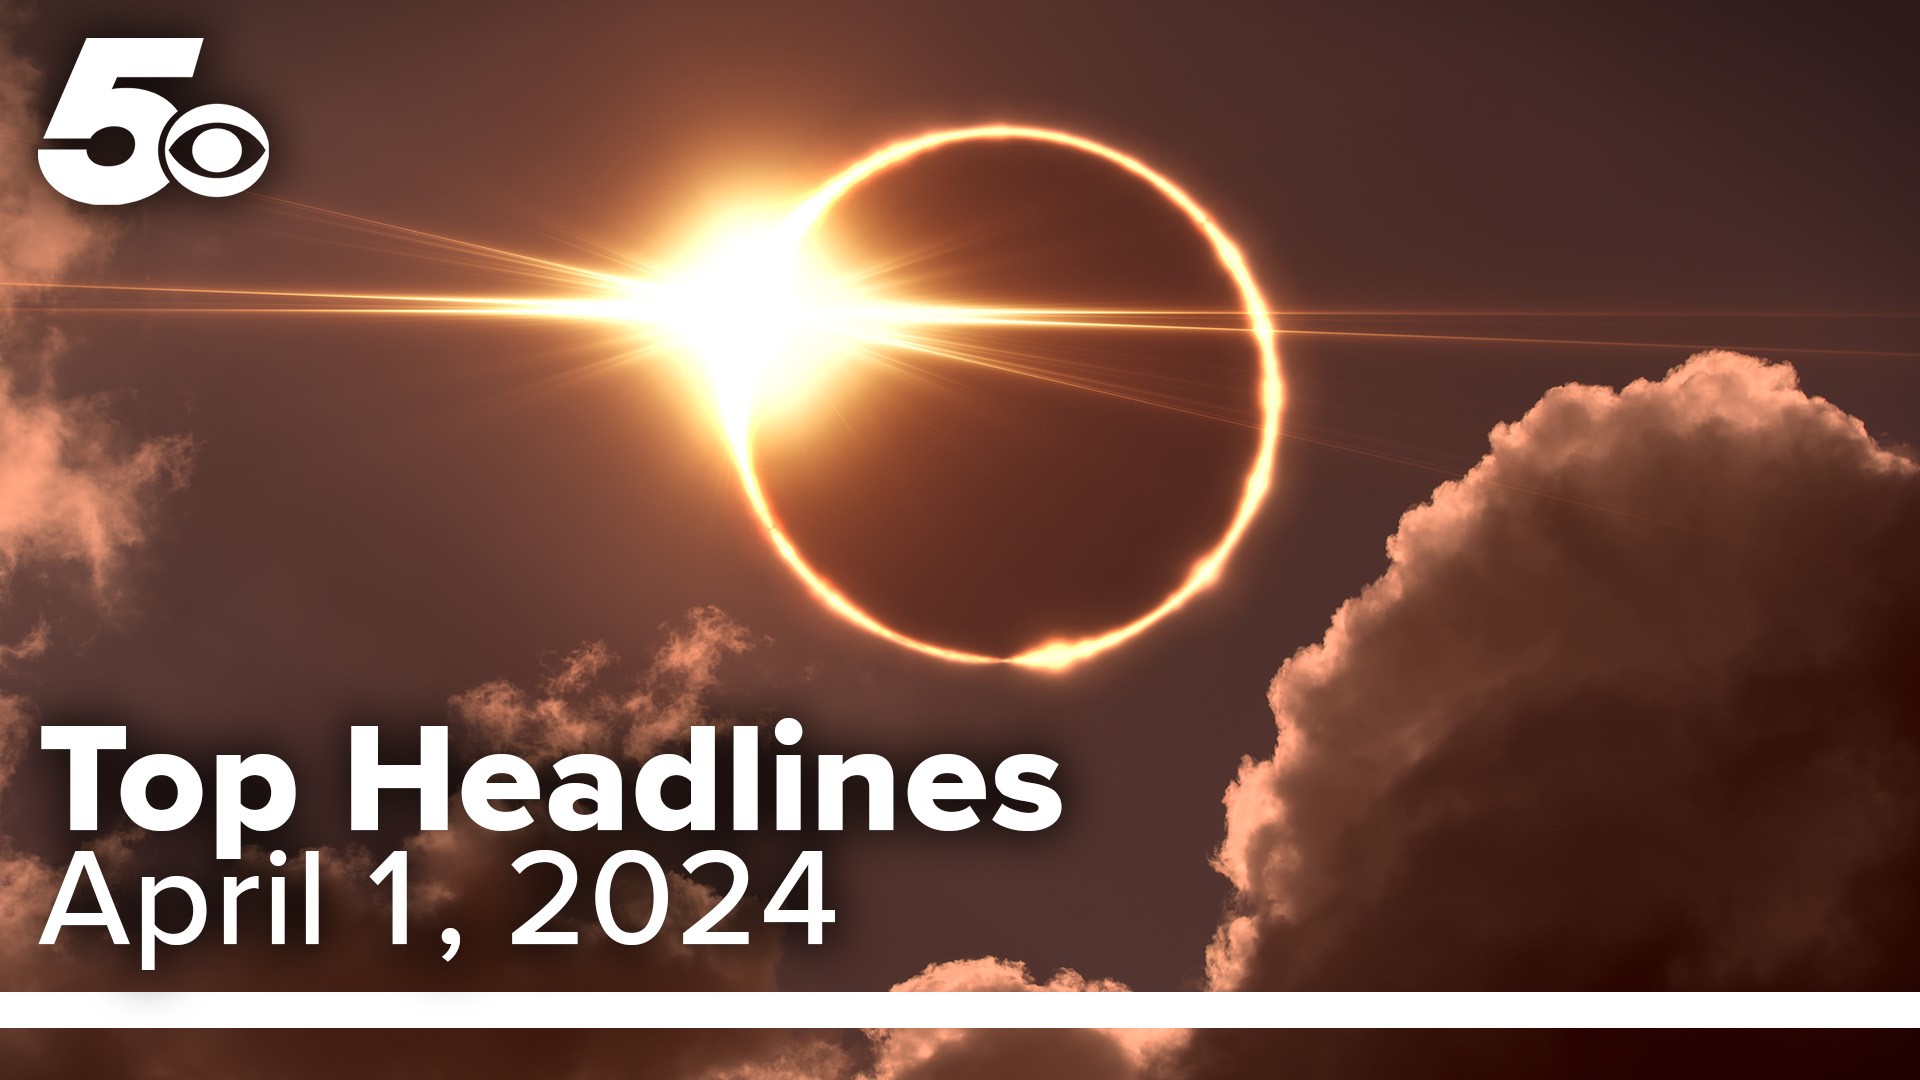 We are just eight days away from the solar eclipse. Watch 5NEWS Top Headlines for traffic safety information and more.